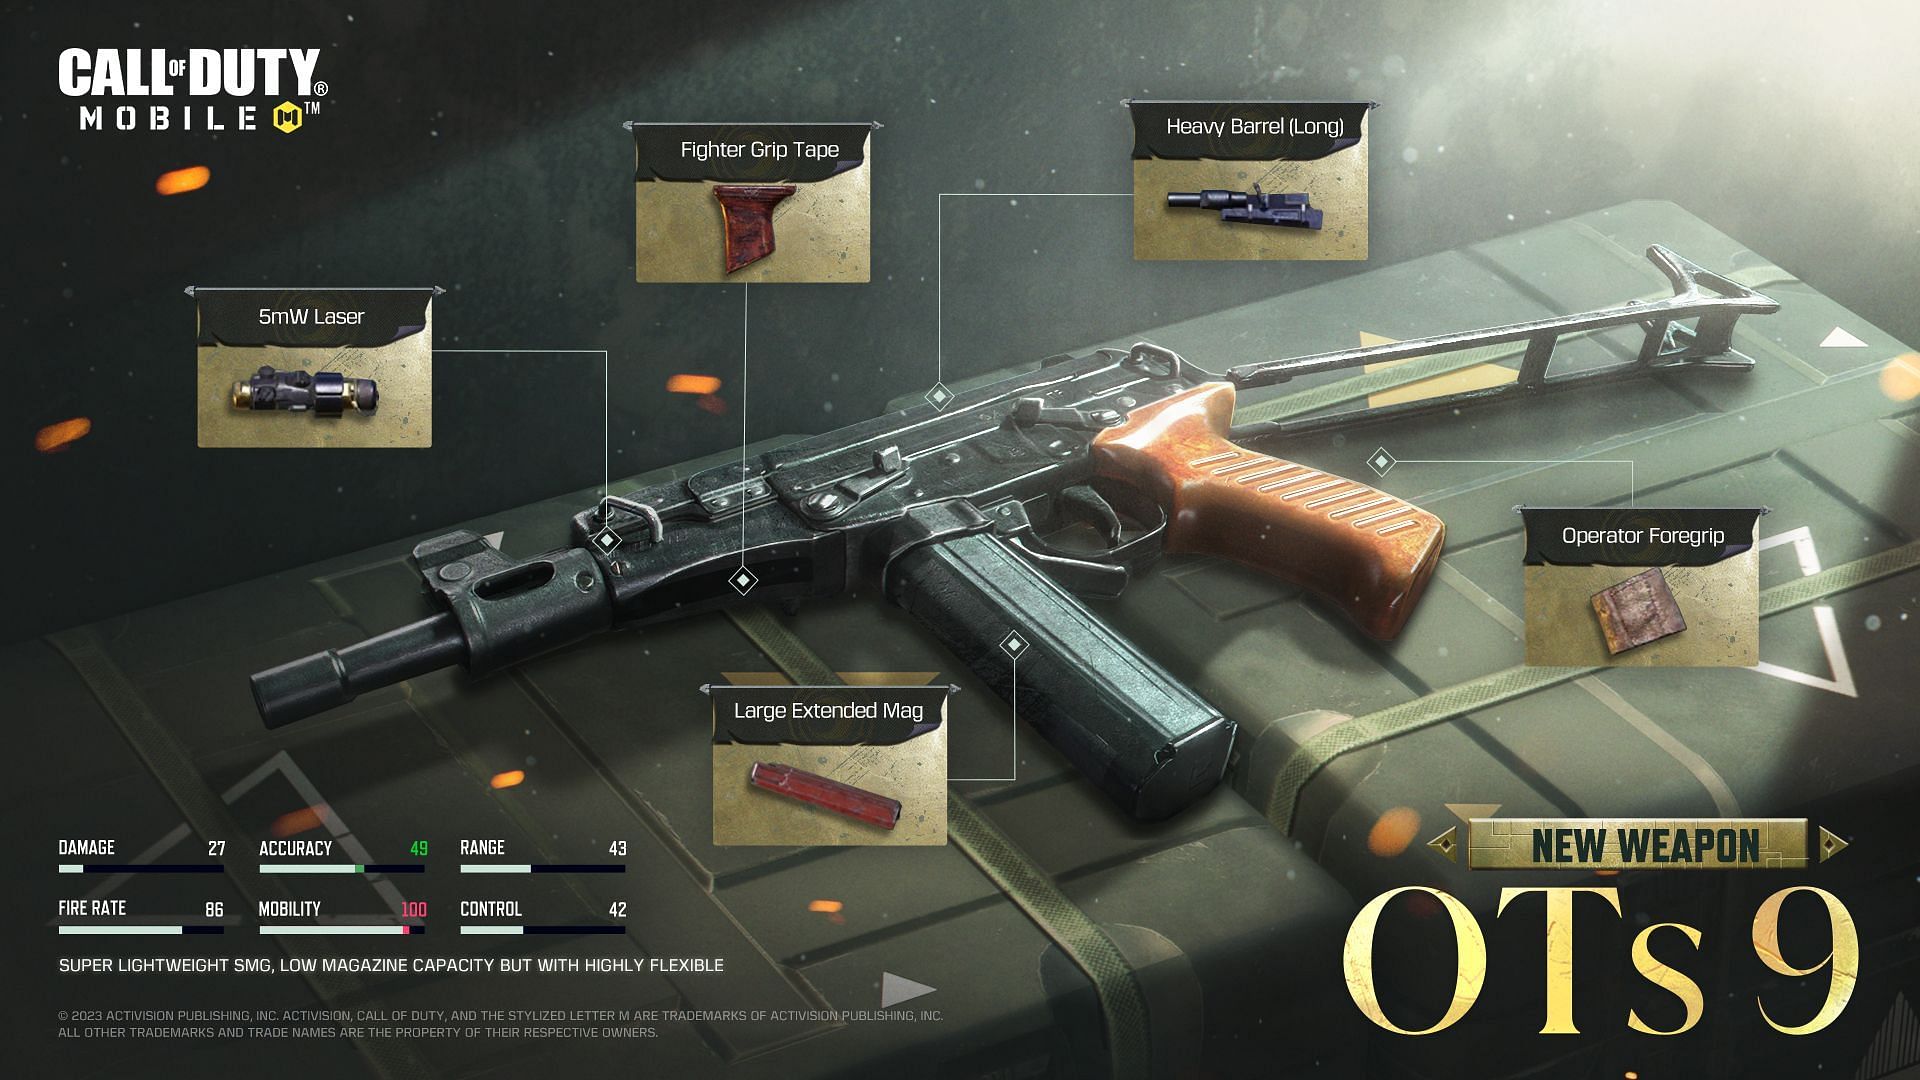 Developers recommend their ideal OTs 9 loadout for Call of Duty Mobile Season 4 (Image via Activision)